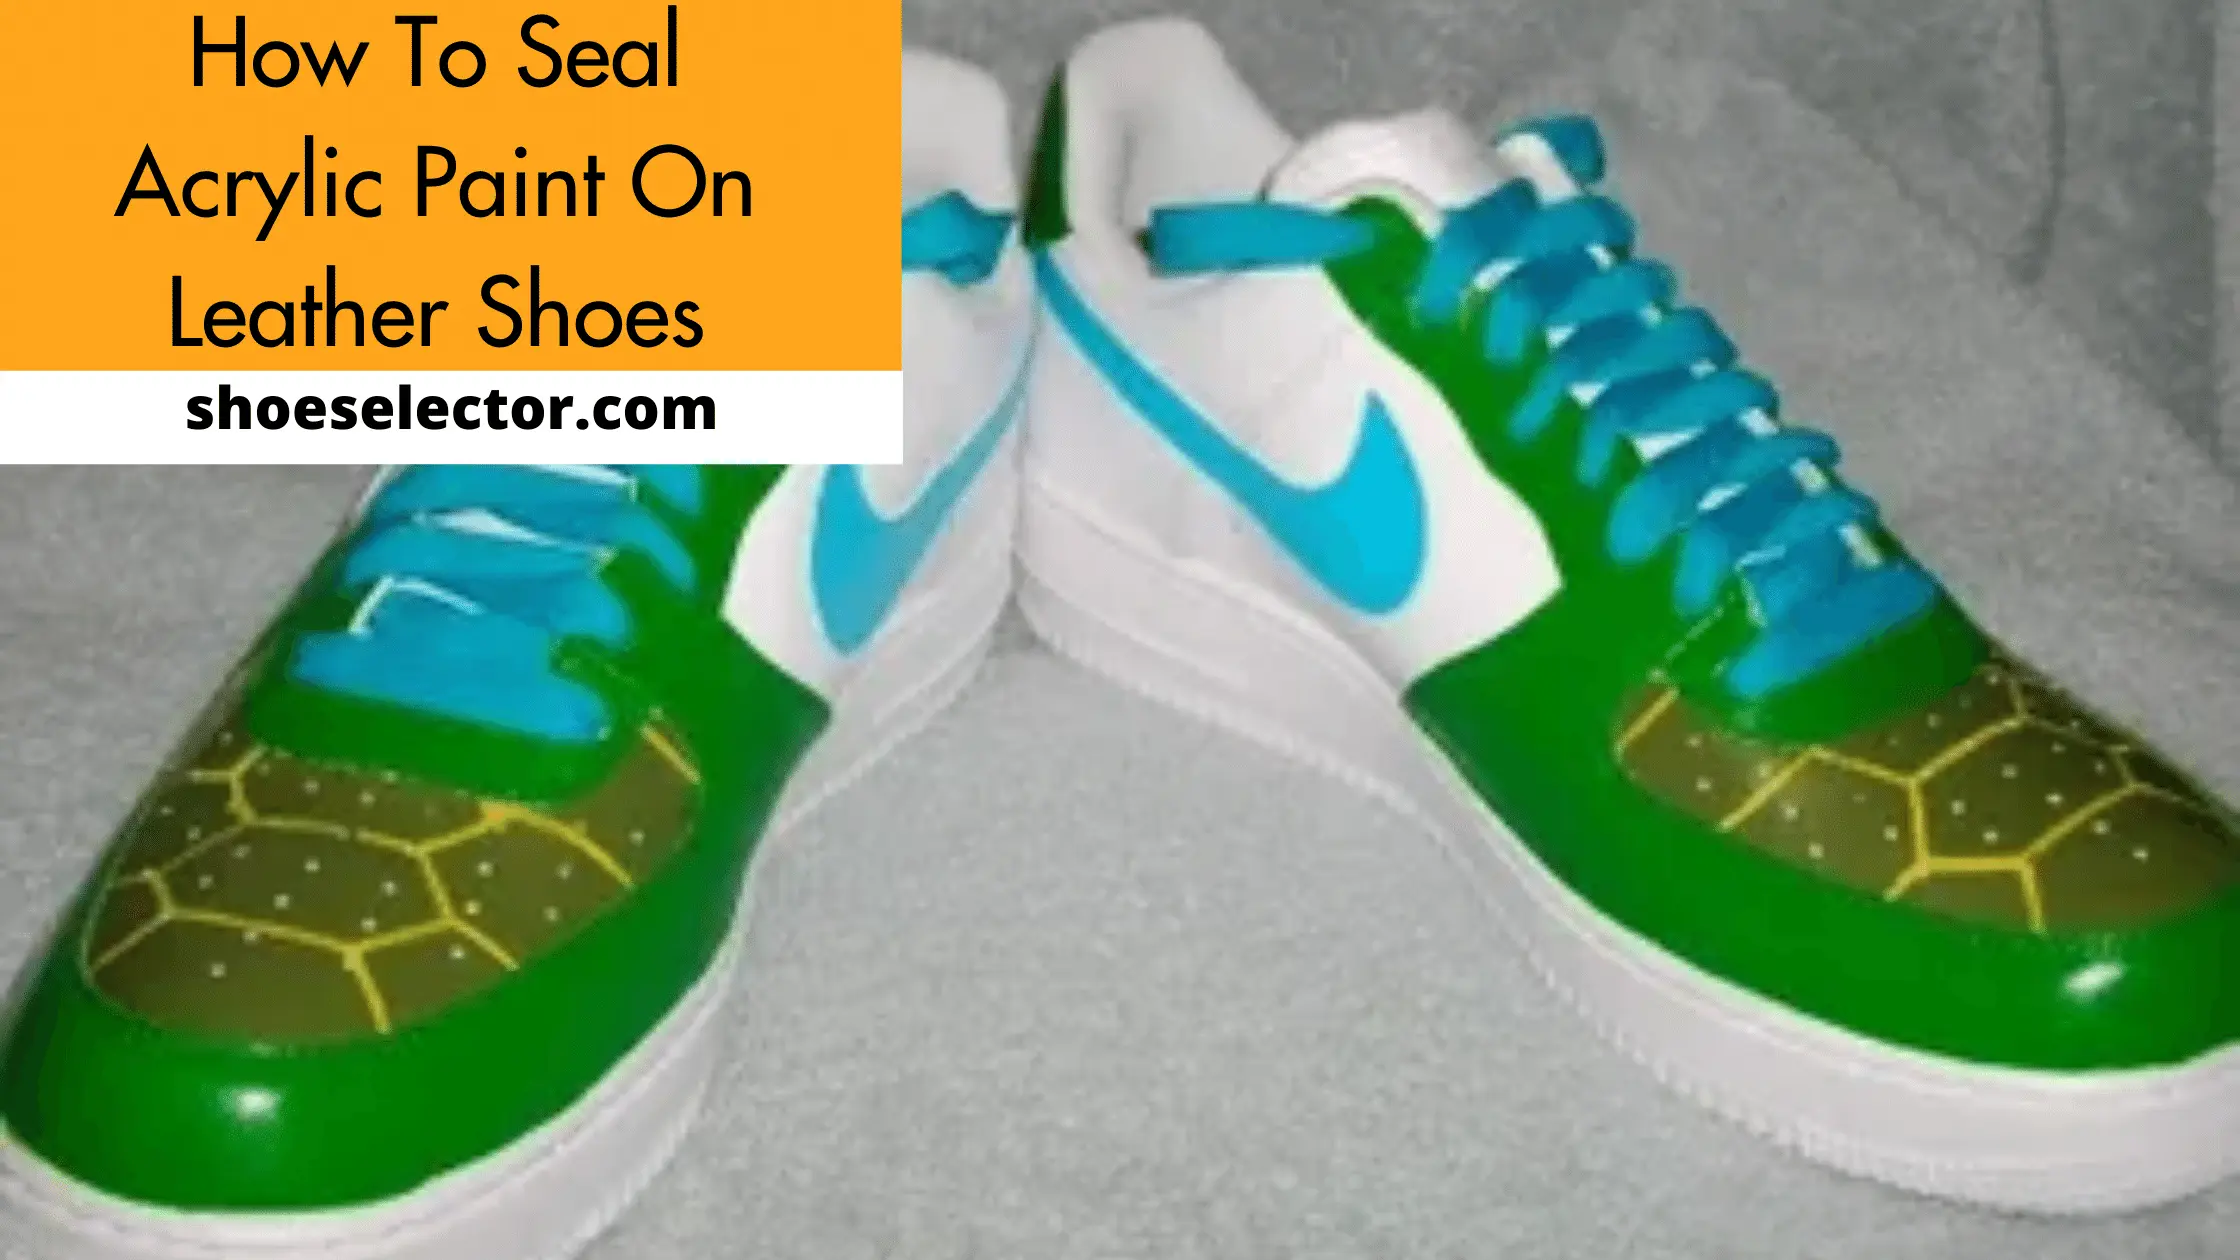 How To Seal Acrylic Paint On Leather Shoes? Complete Guide